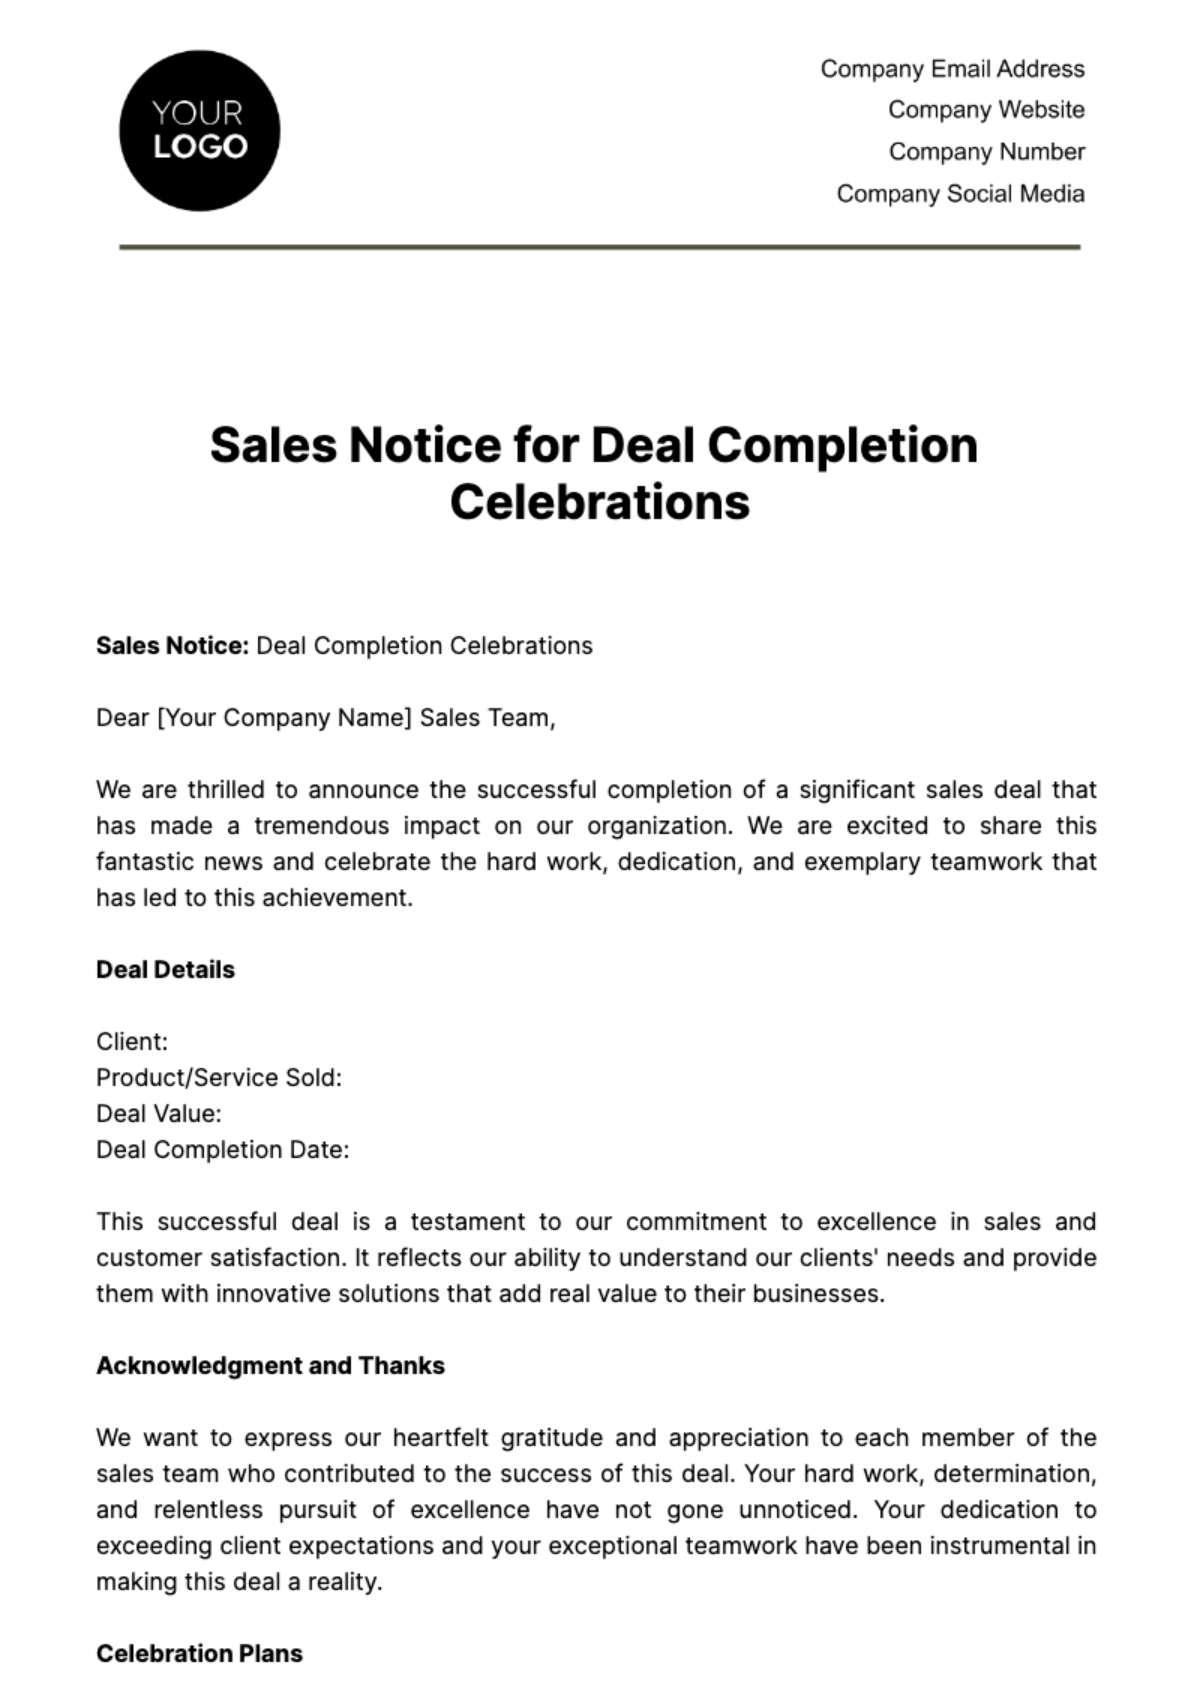 Free Sales Notice for Deal Completion Celebrations Template